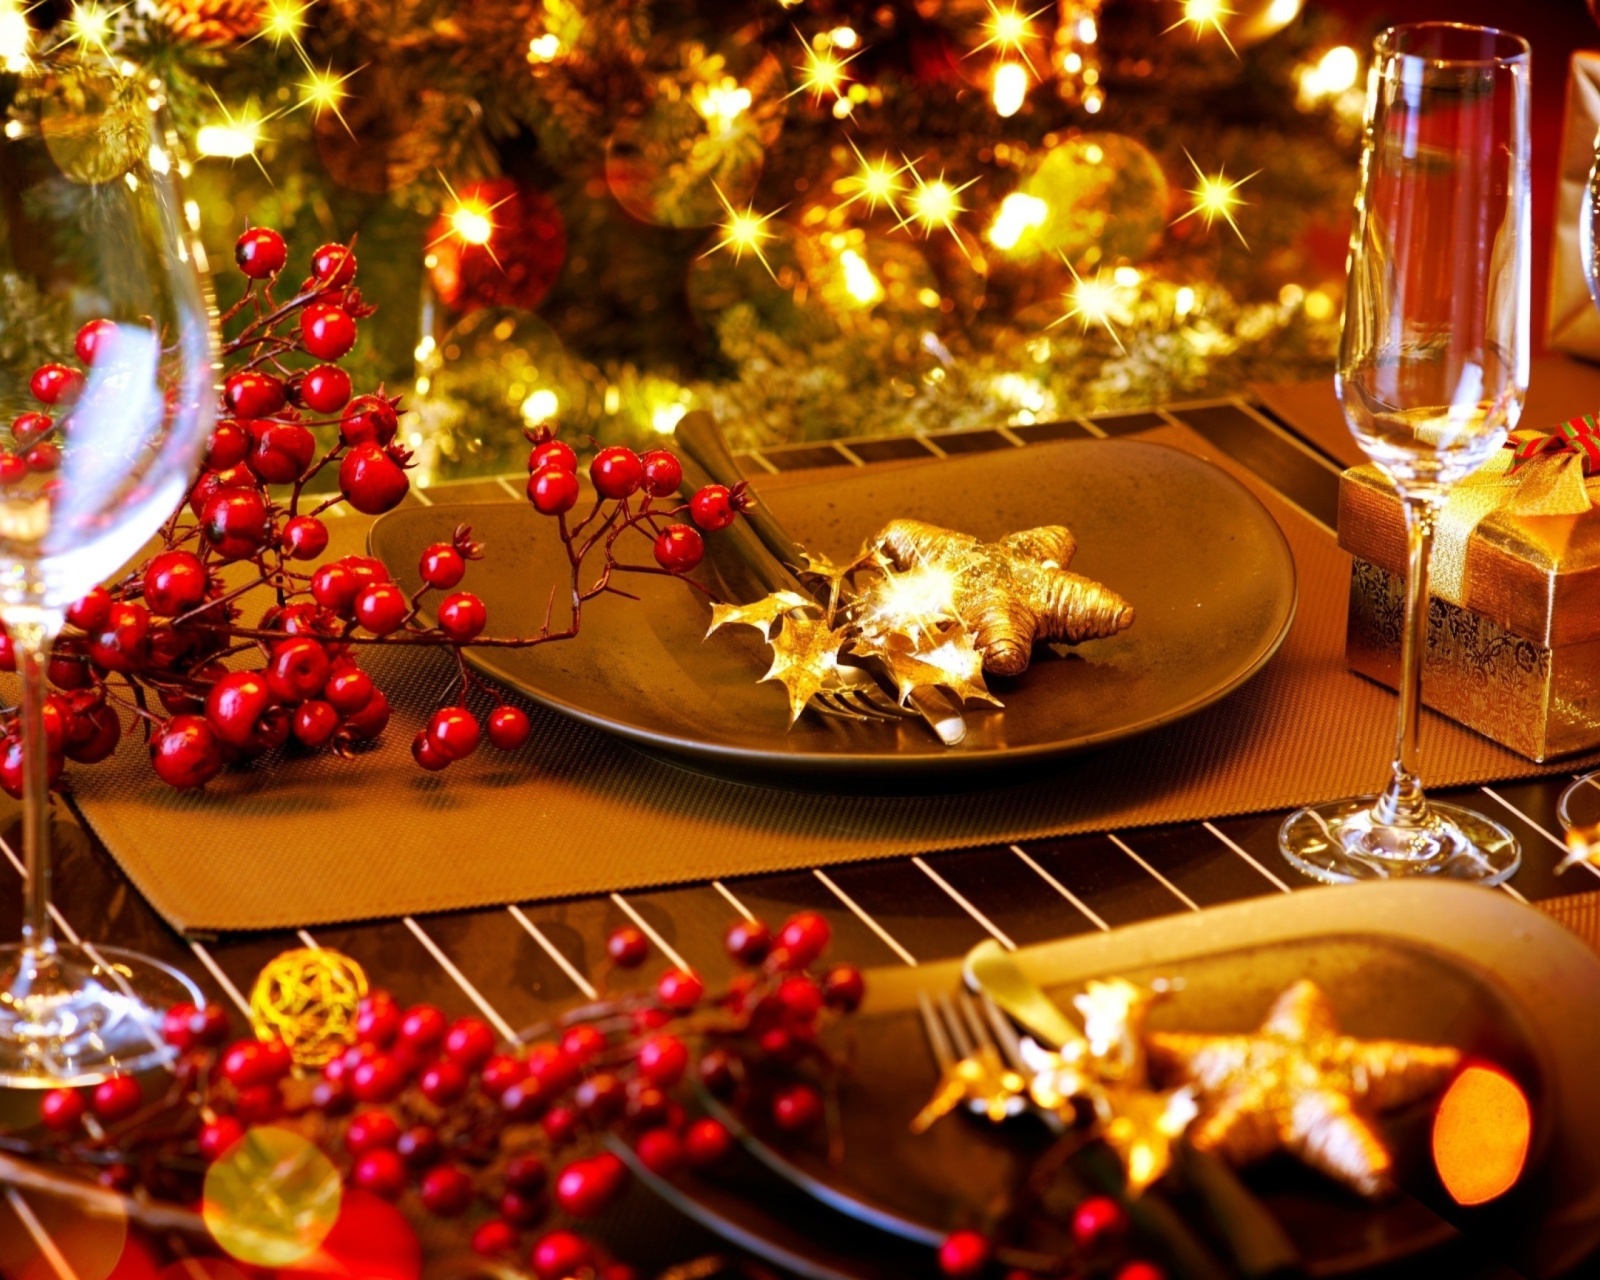 Christmas Table Decorations wallpaper 1600x1280